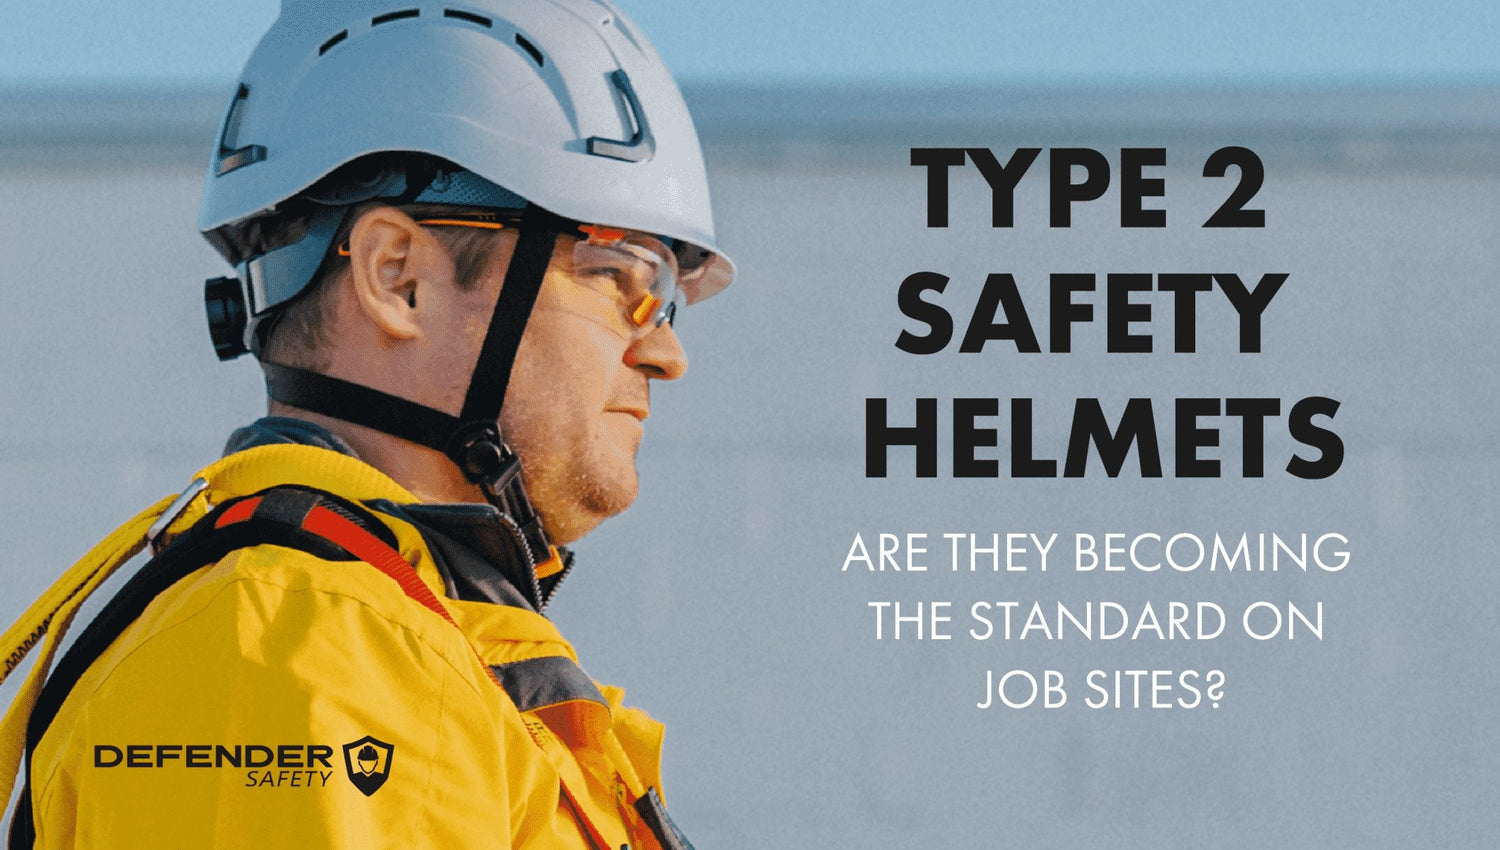 Are Type 2 Safety Helmets Becoming the Standard on Job Sites? - Defender Safety